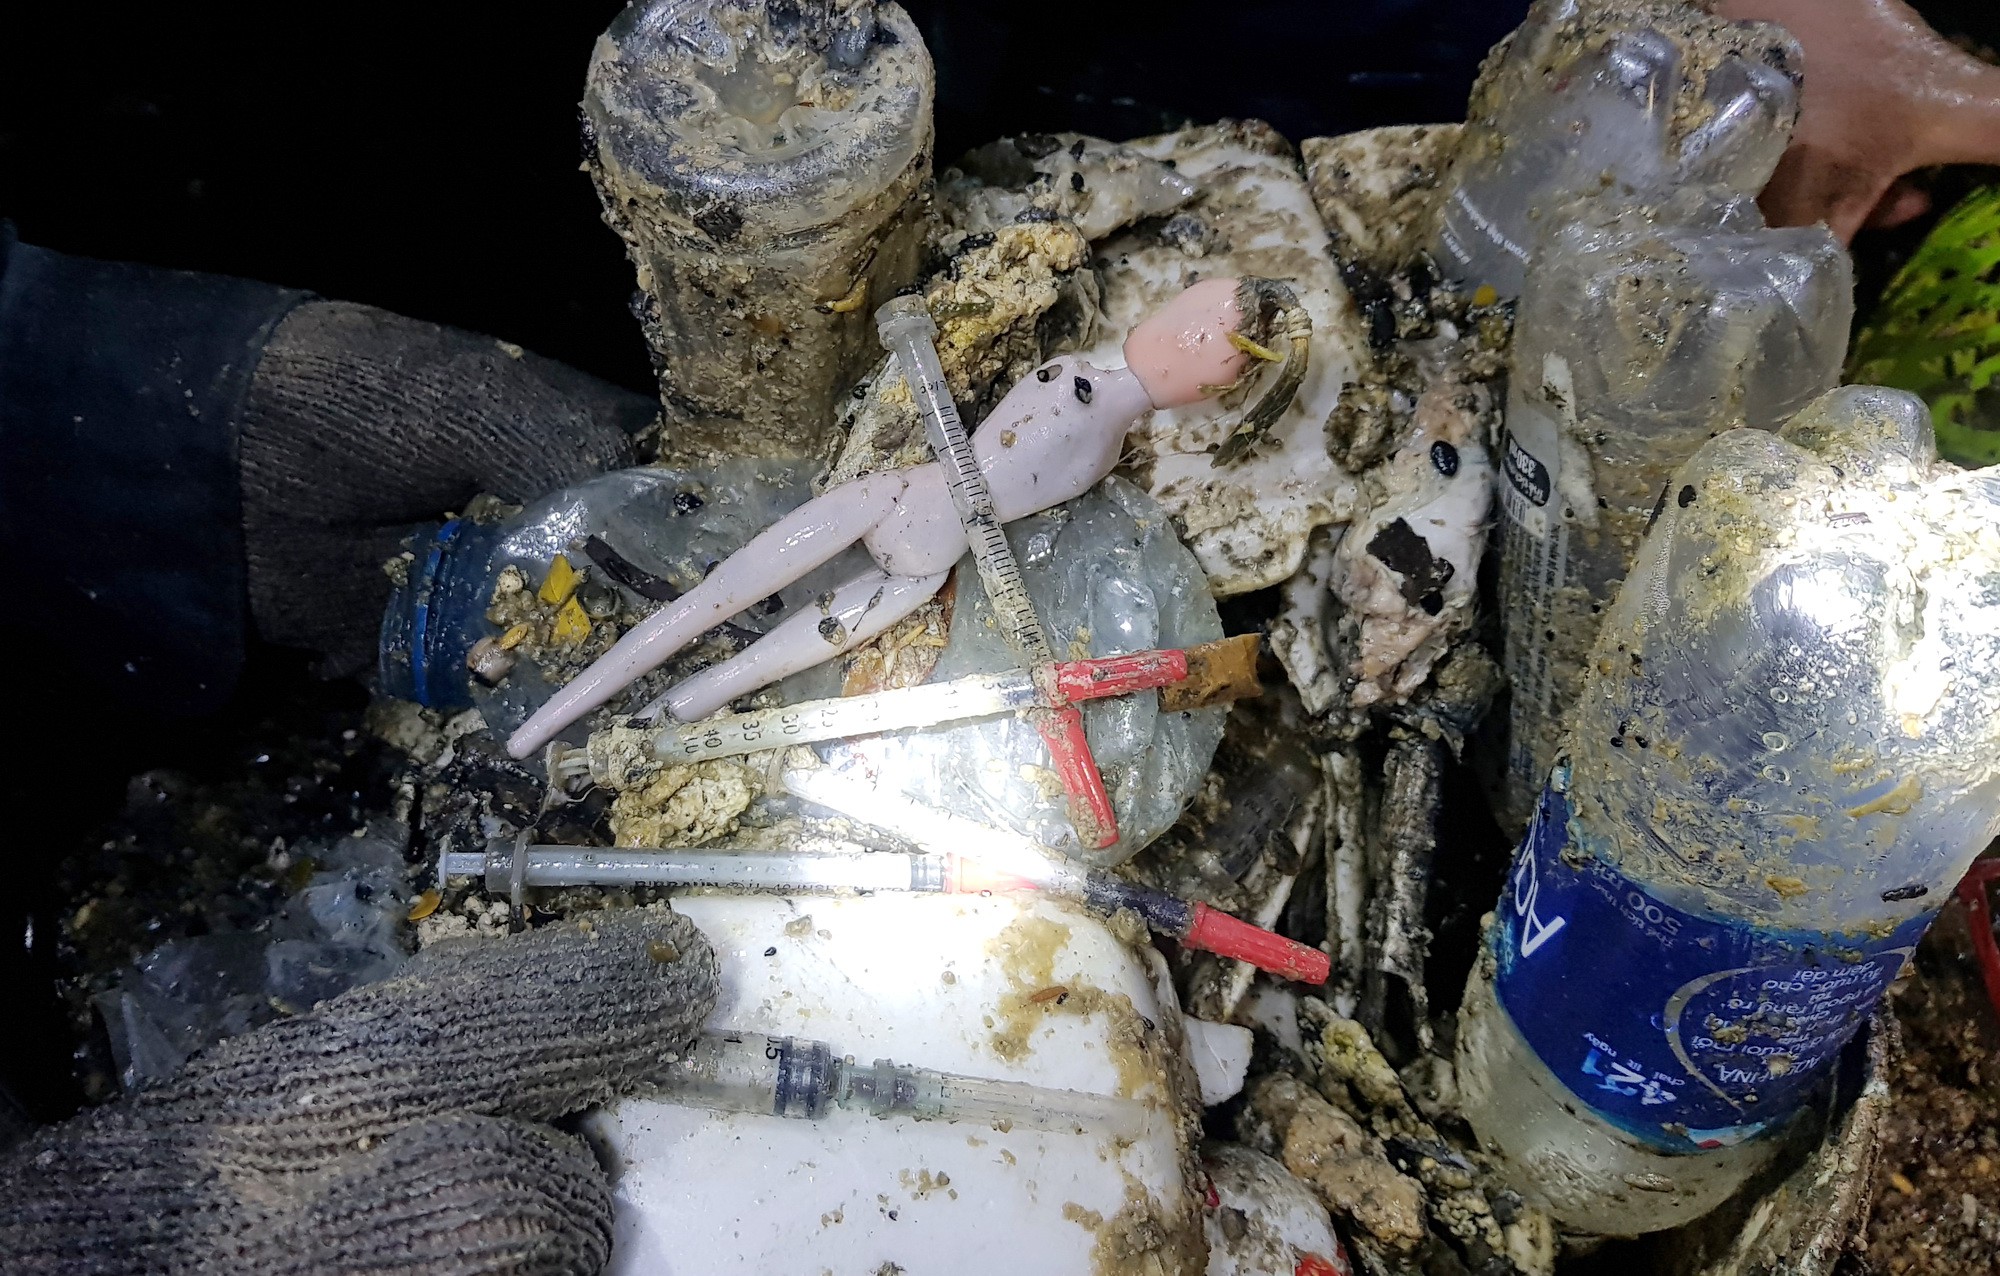 Syringes and plastic items are seen in a sewage pipe in Ho Chi Minh City, Vietnam. Photo: Tuoi Tre